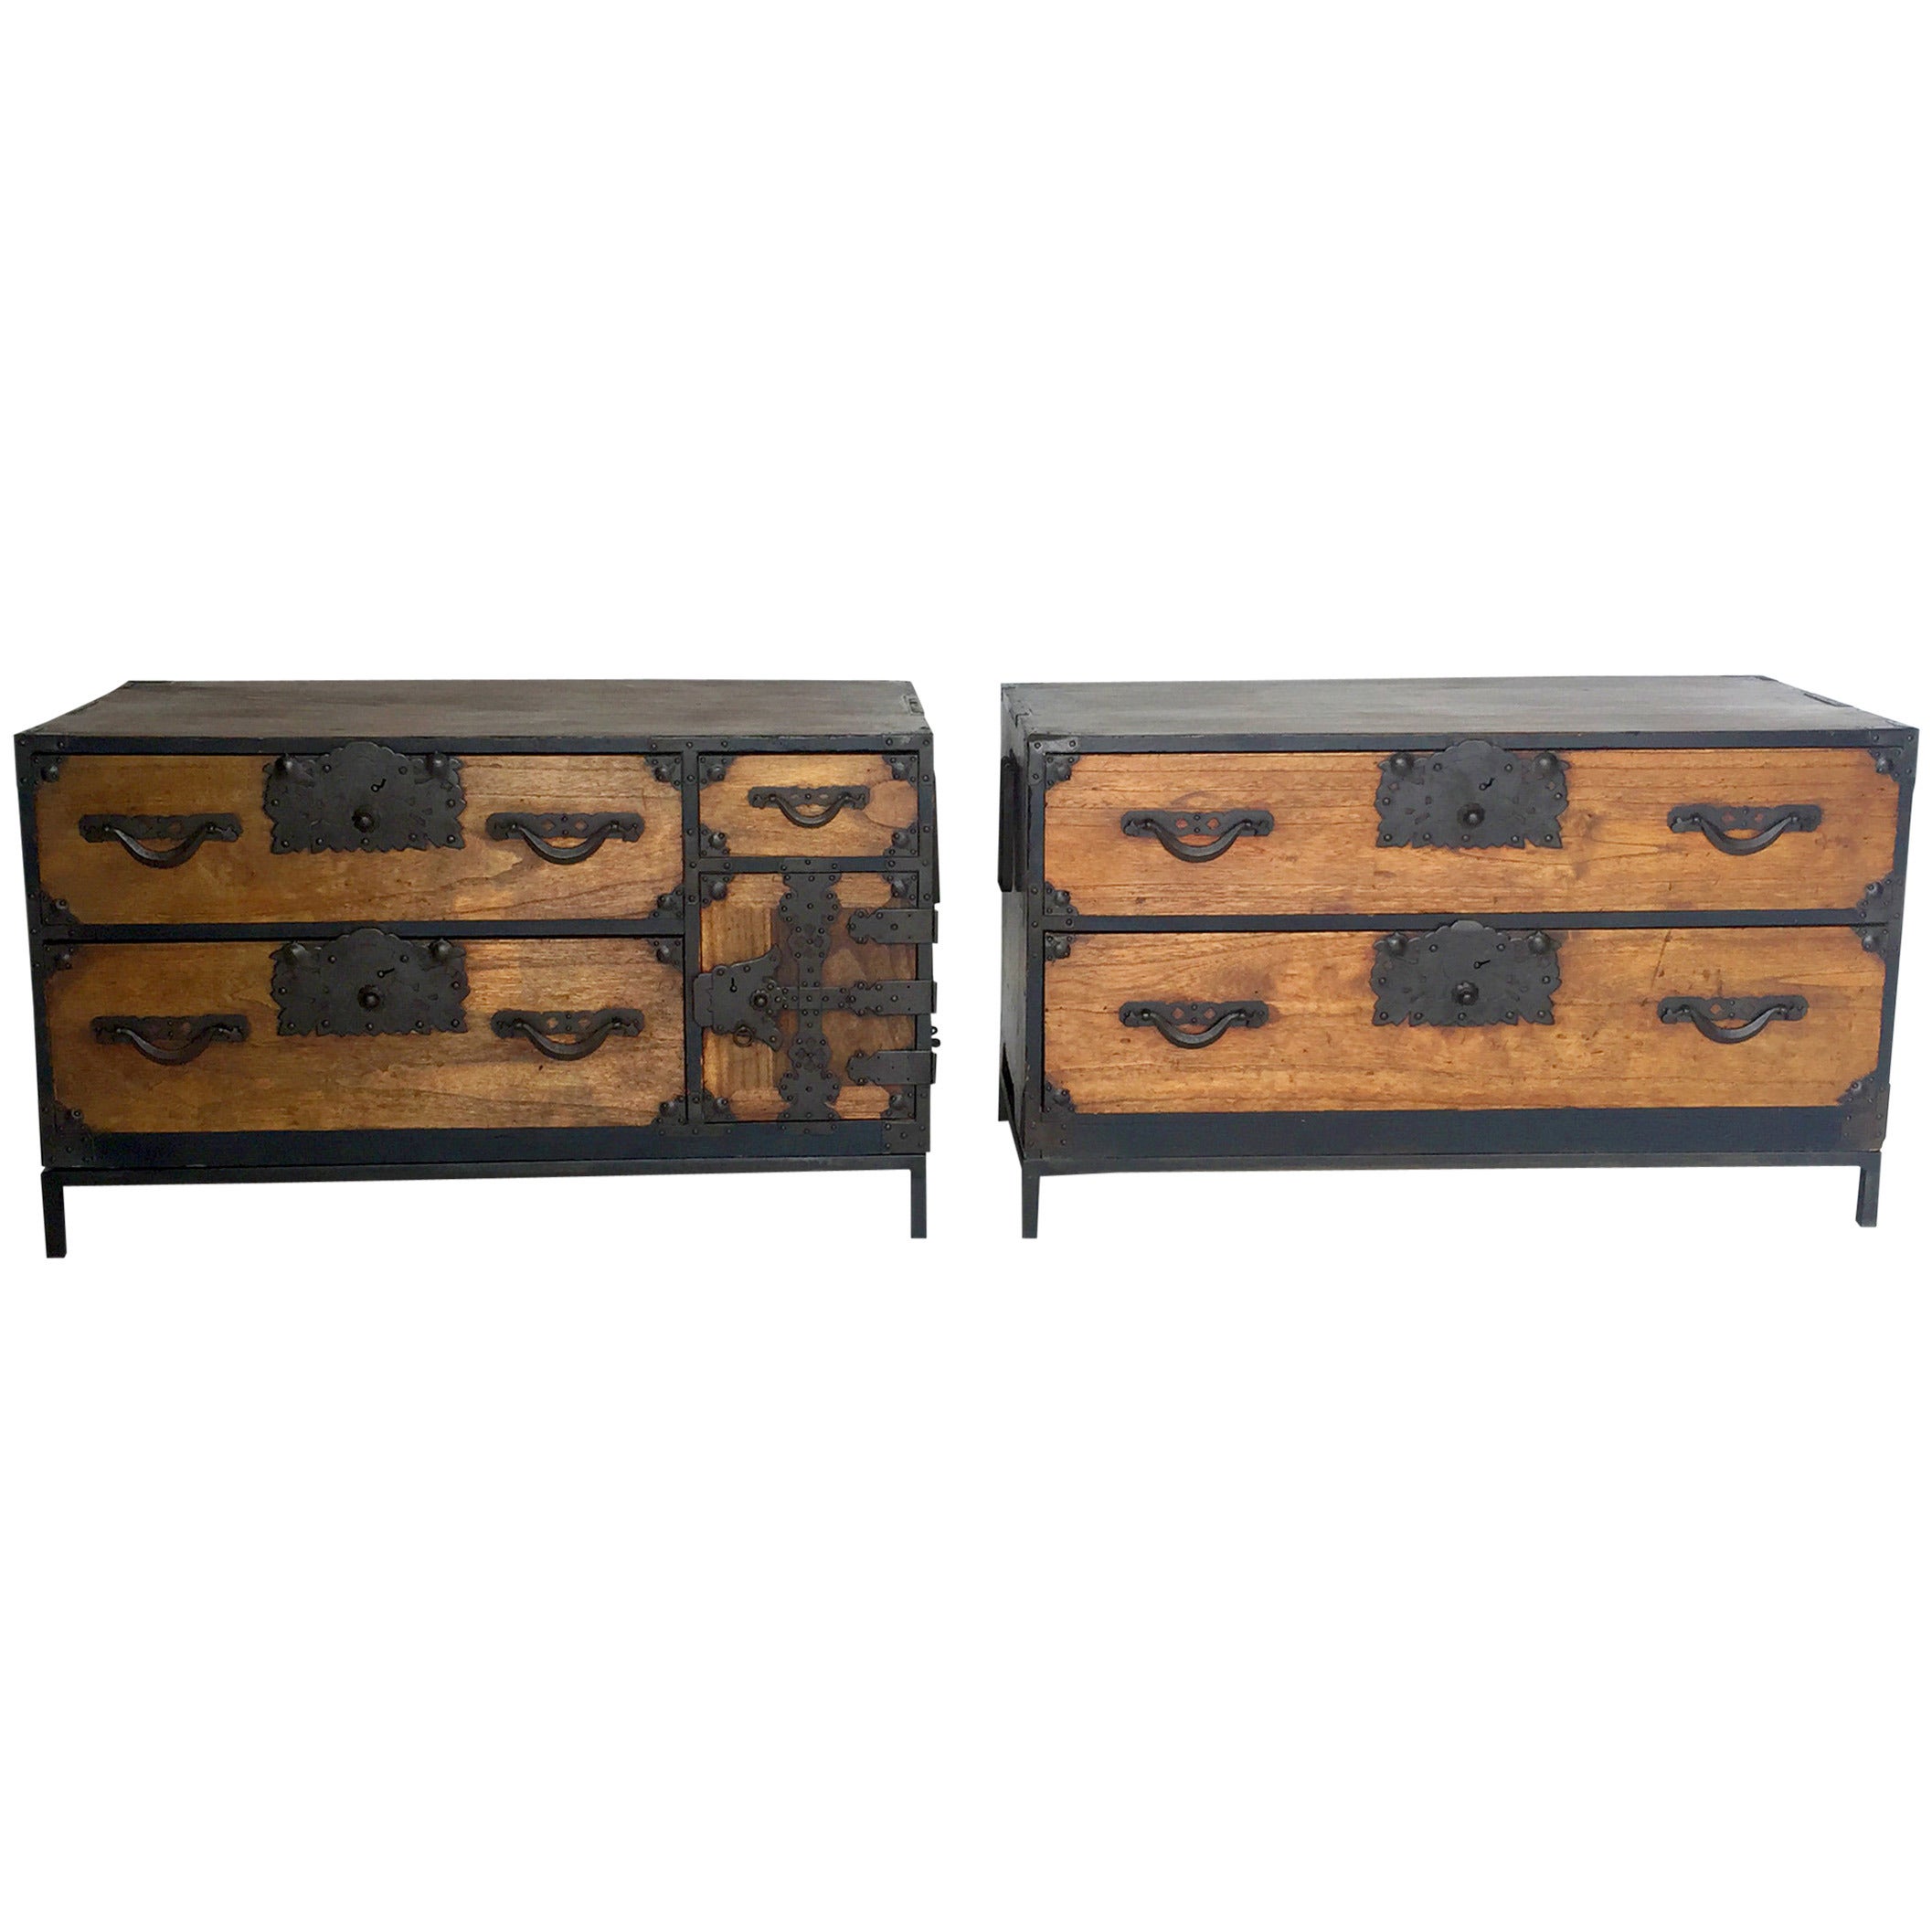 Pair of Tansu Night Stands